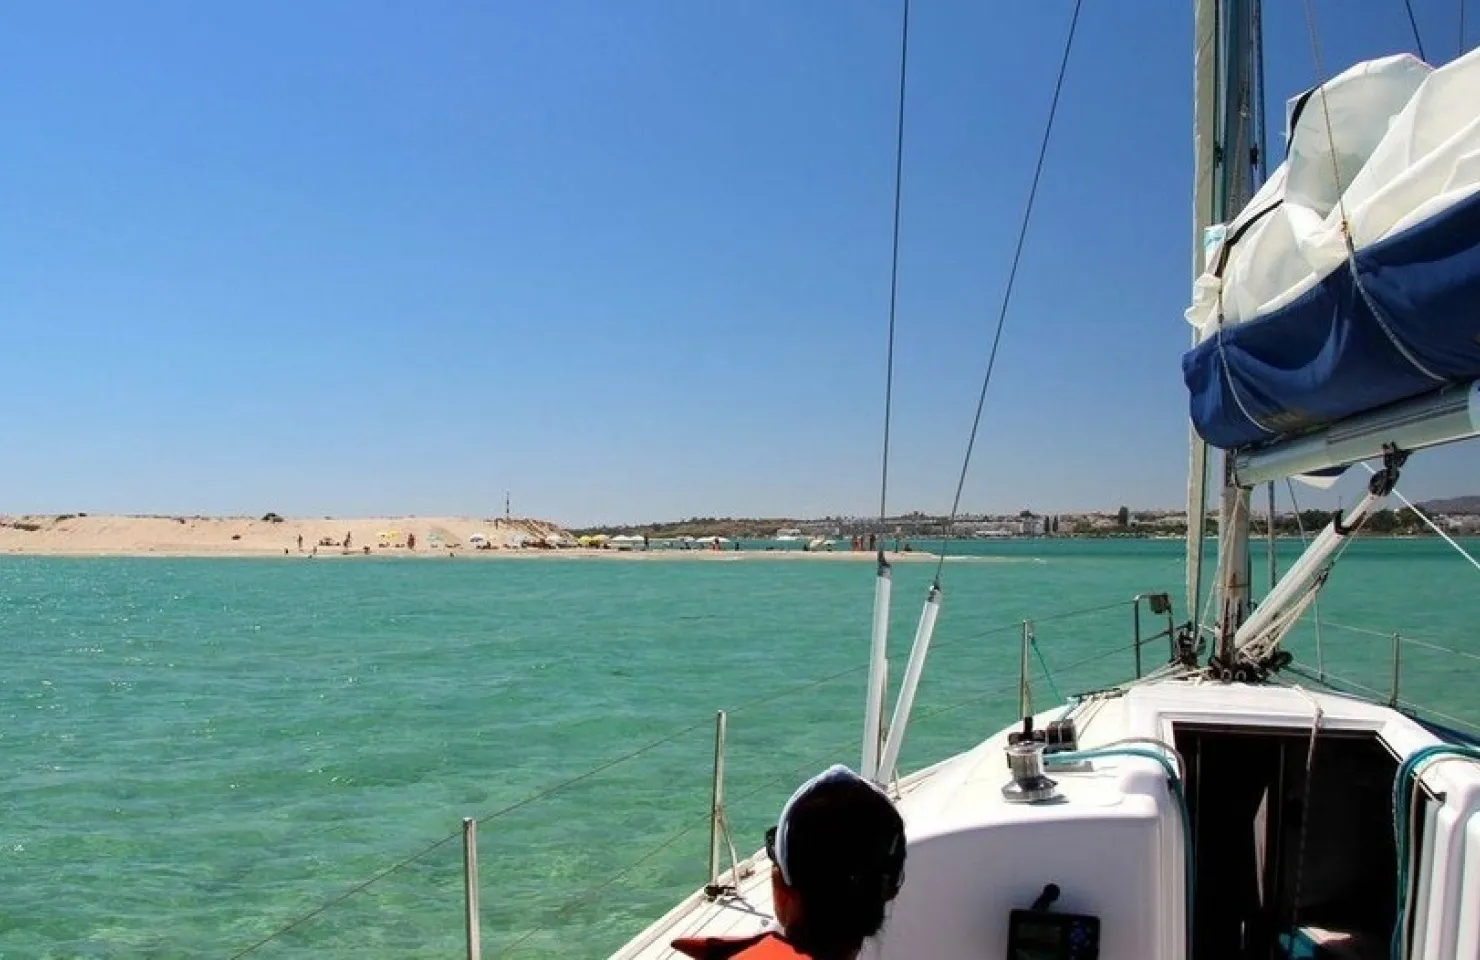 Half Day Sailing Tour in Formosa - Activities and Things to Do in Ria Formosa Natural Park